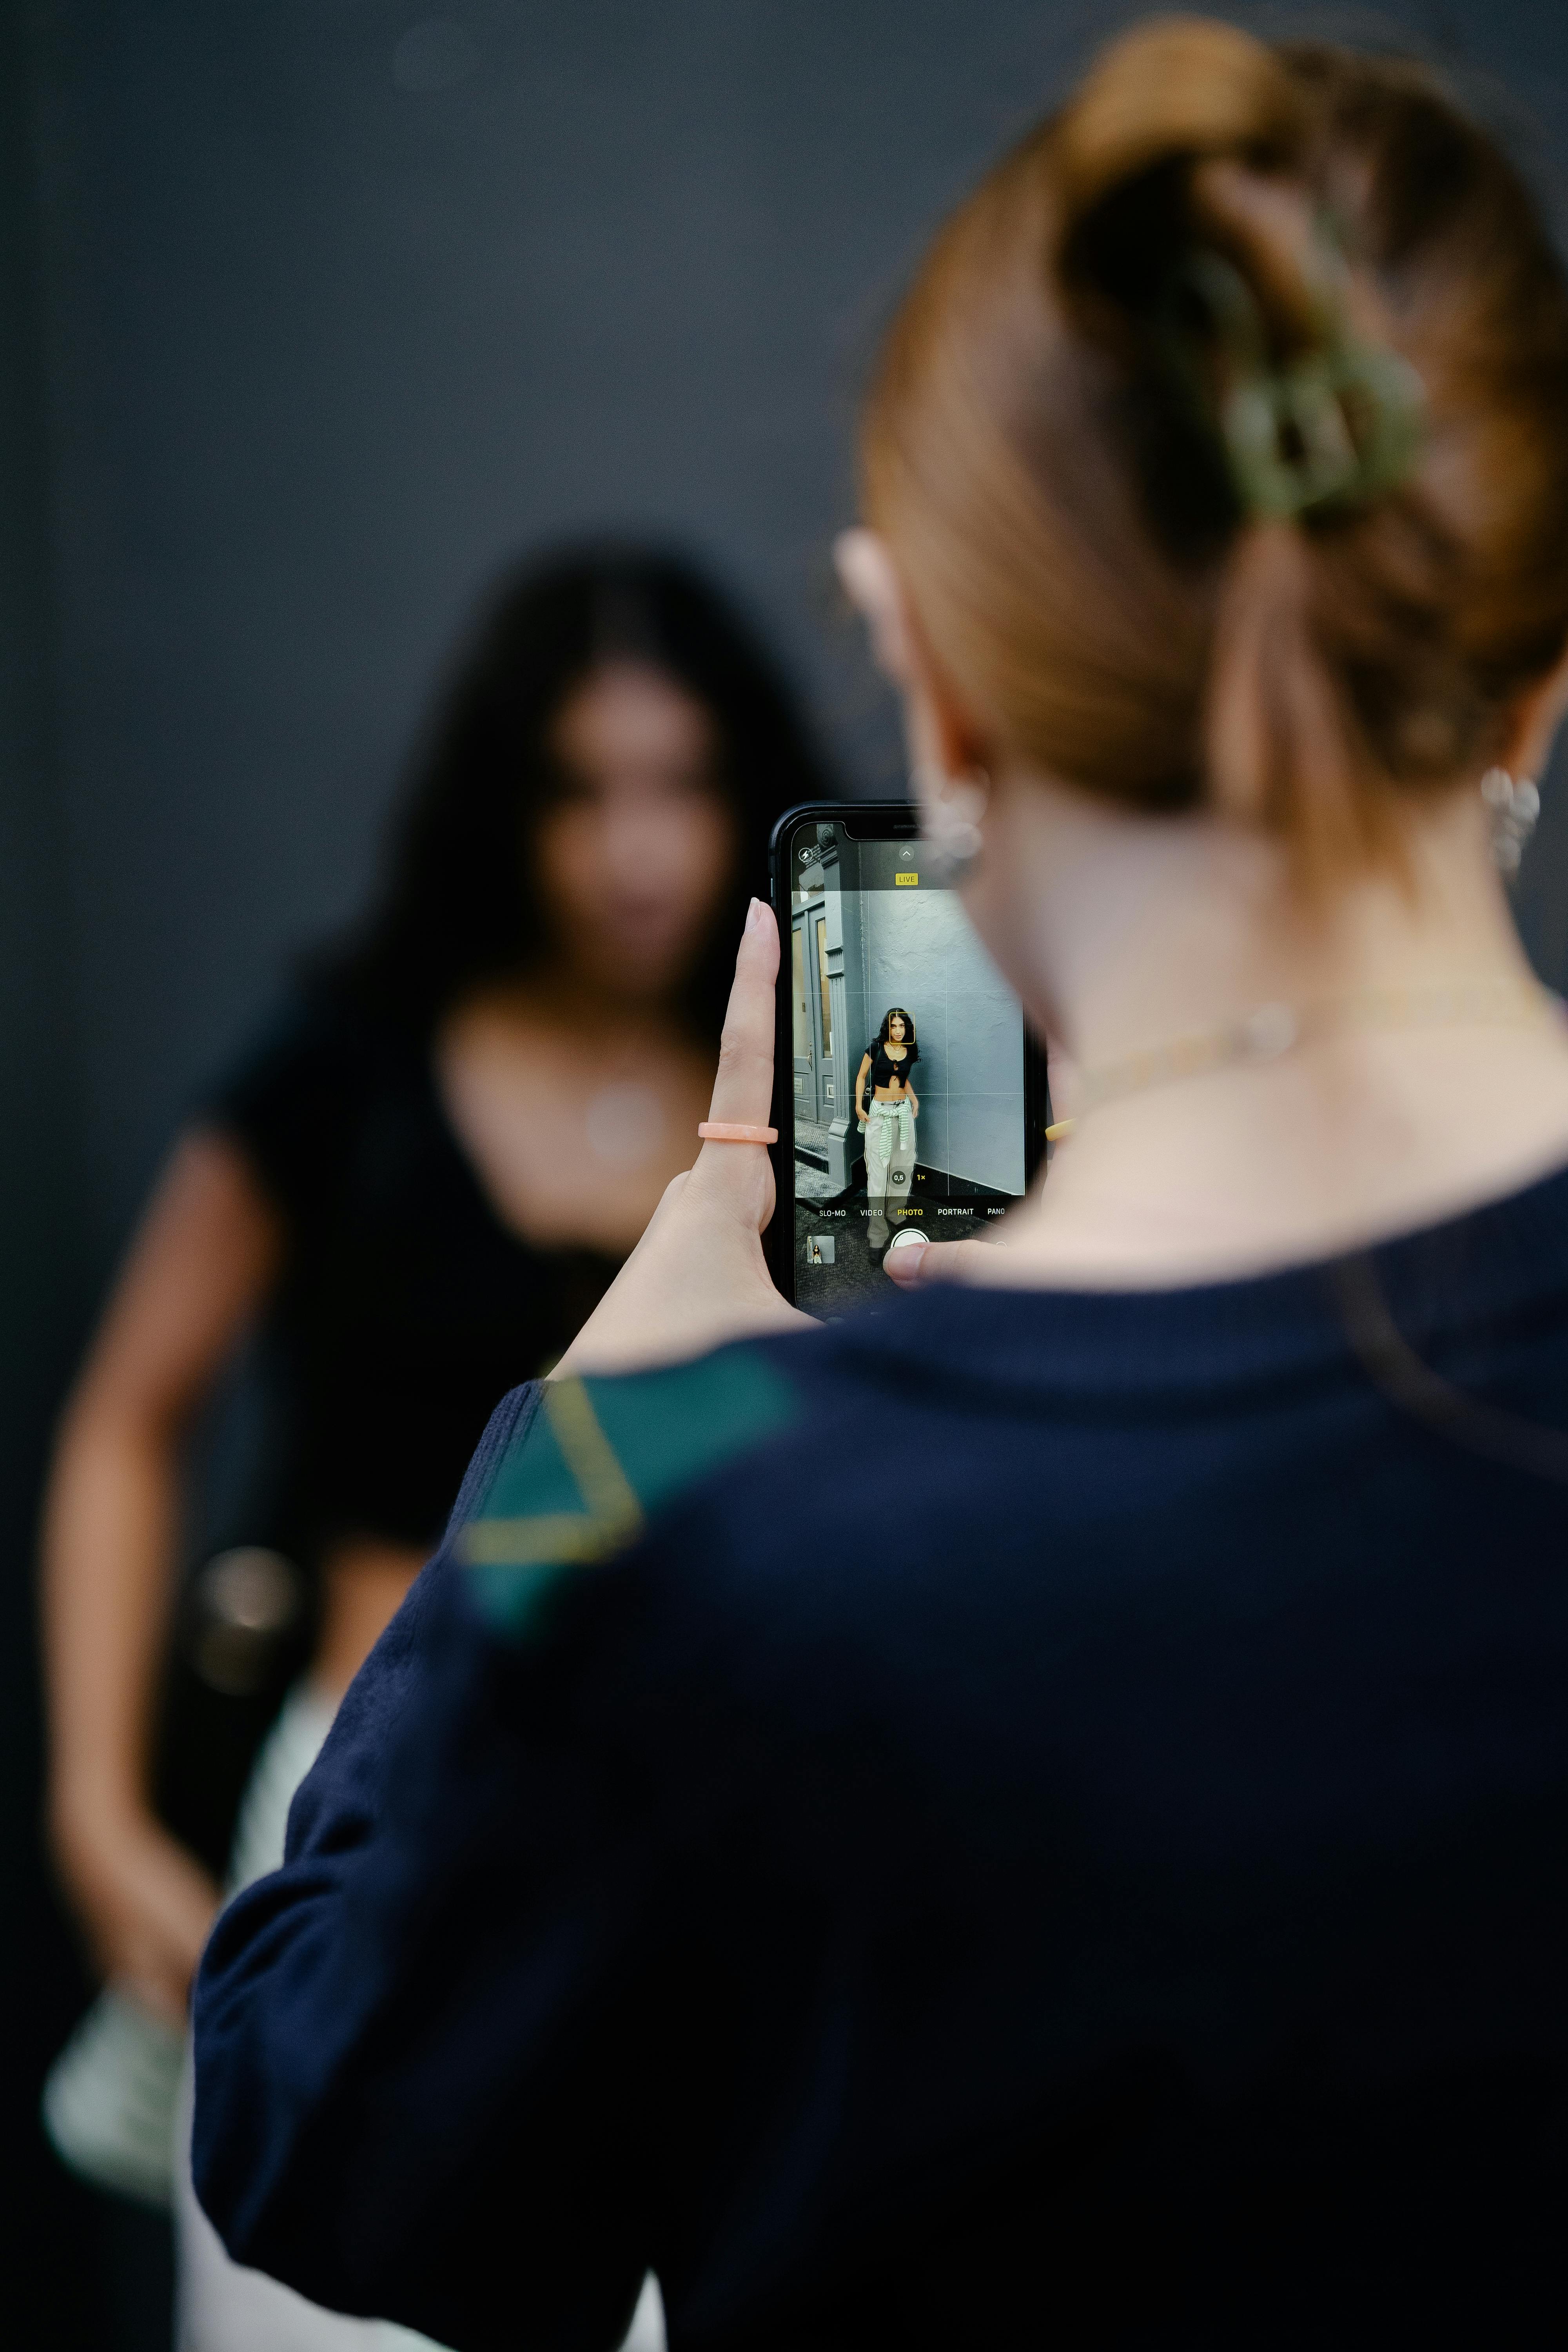 A woman taking a photo of another woman | Source: Pexels